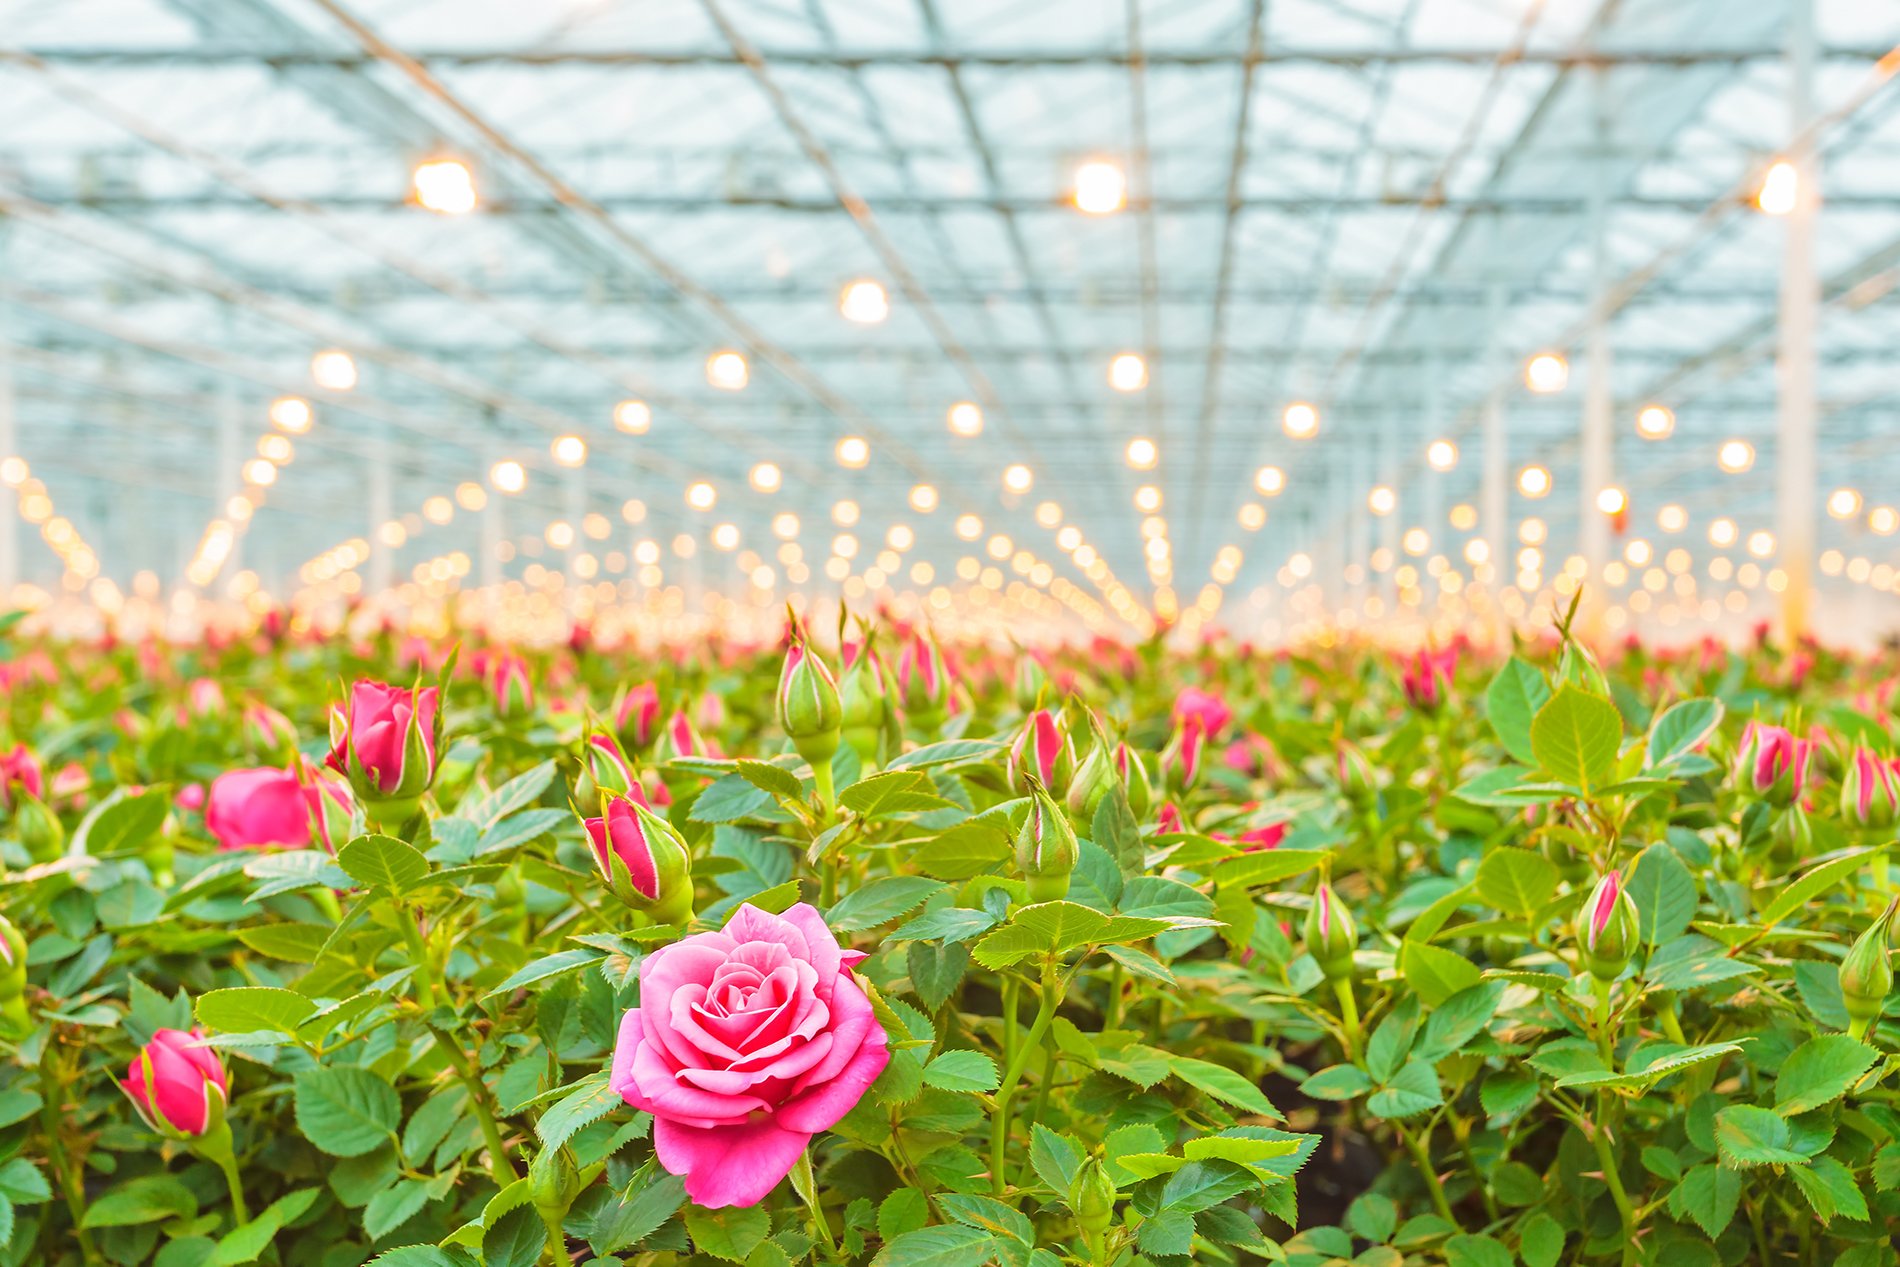 The Roses grown in greenhouse 53115 Wallpaper